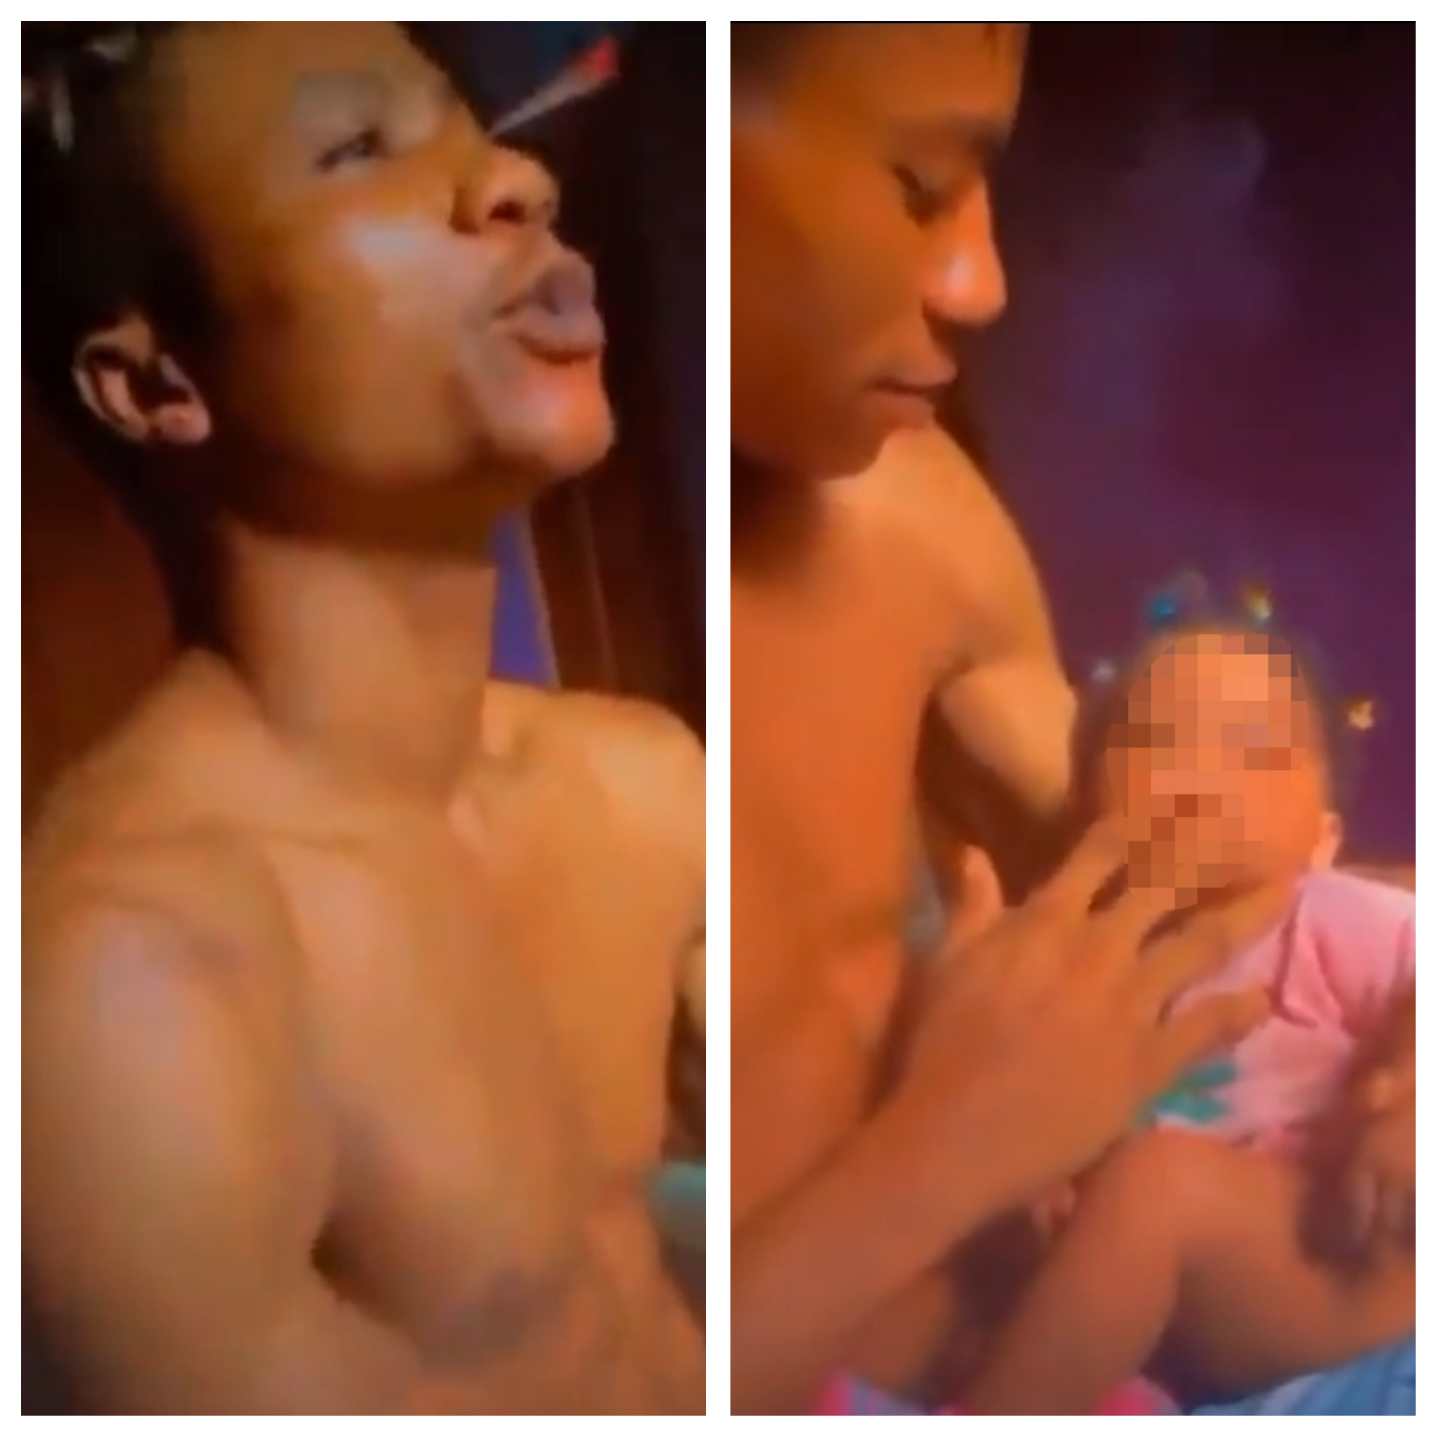 [VIDEO]: Police Want Man Teaching Baby To Smoke In Viral Video | MarvelTvUpdates